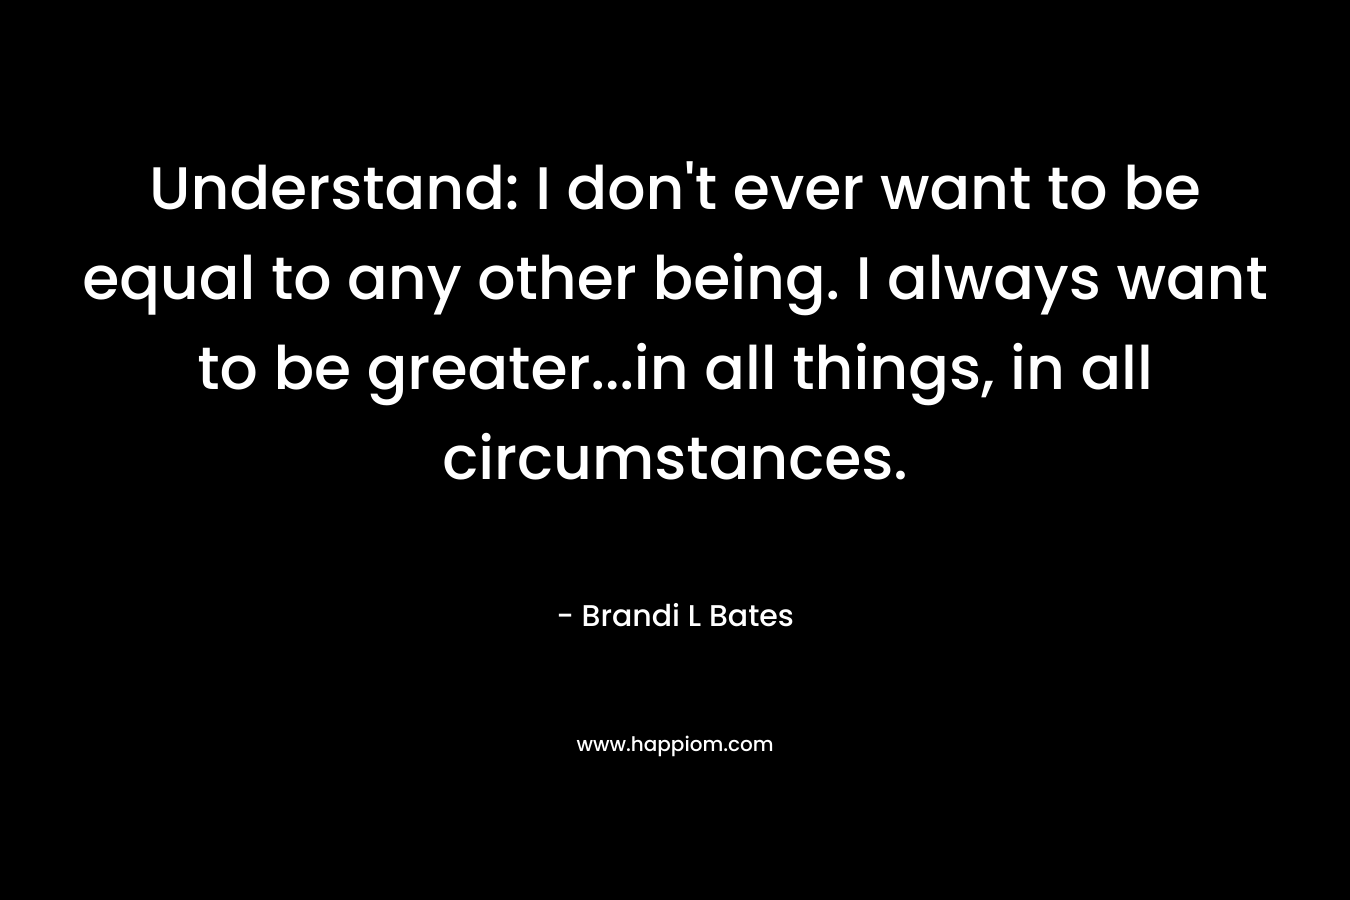 Understand: I don’t ever want to be equal to any other being. I always want to be greater…in all things, in all circumstances. – Brandi L Bates